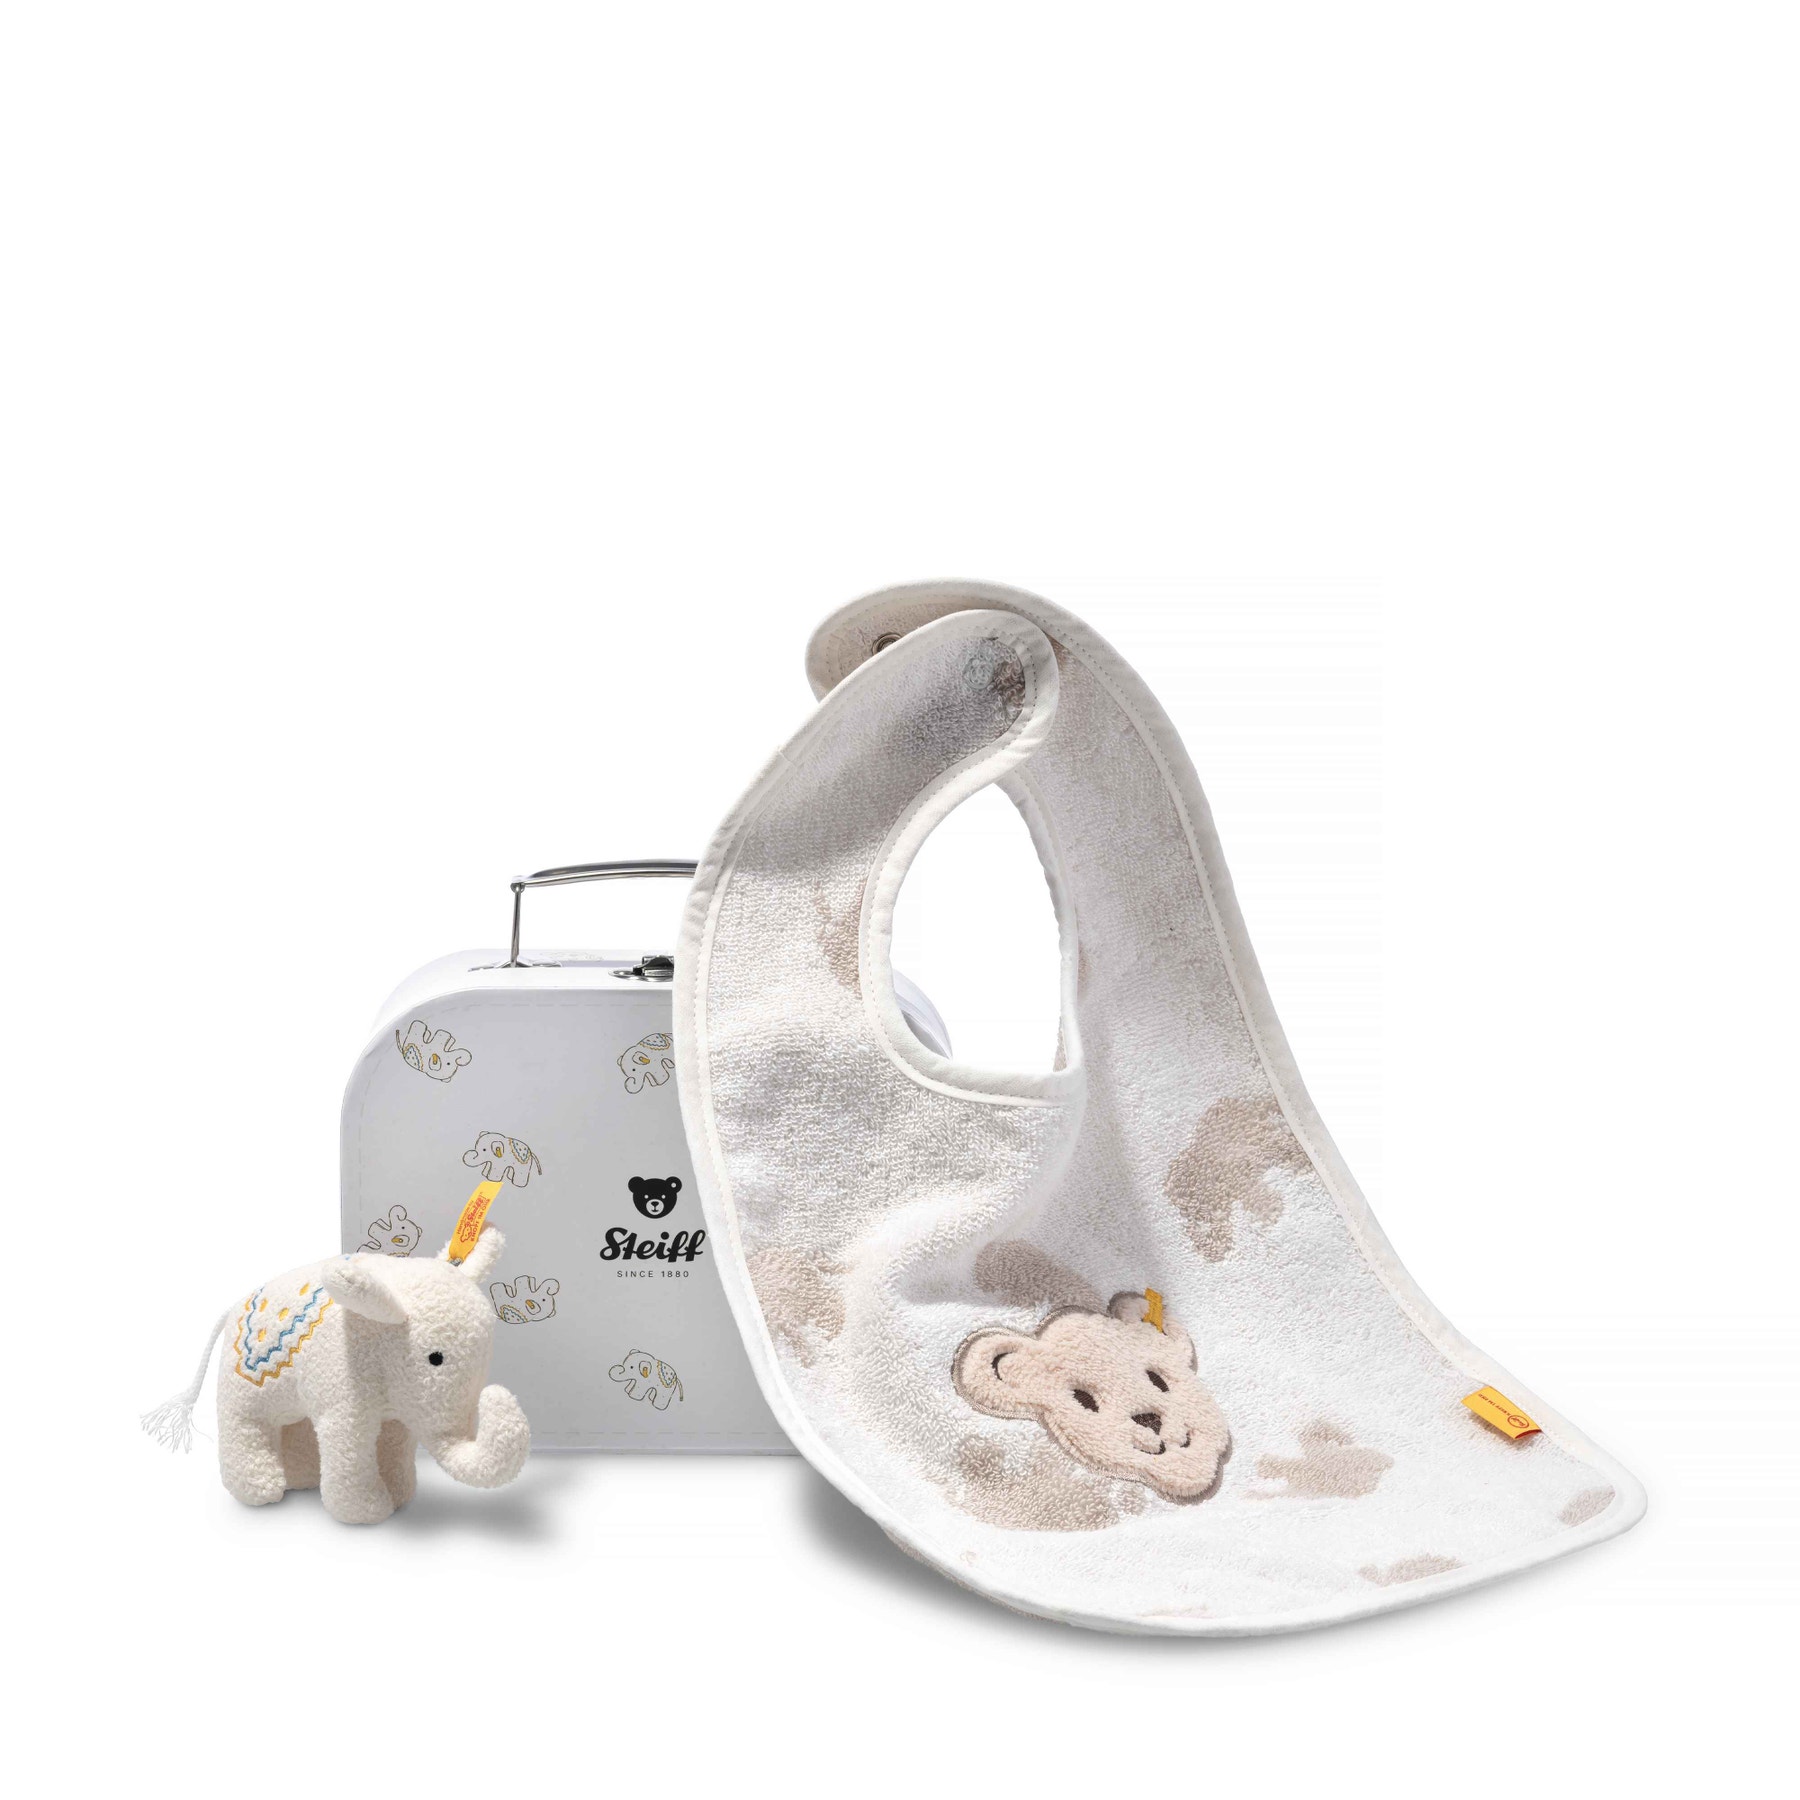 Little elephant with rattle and bib gift set